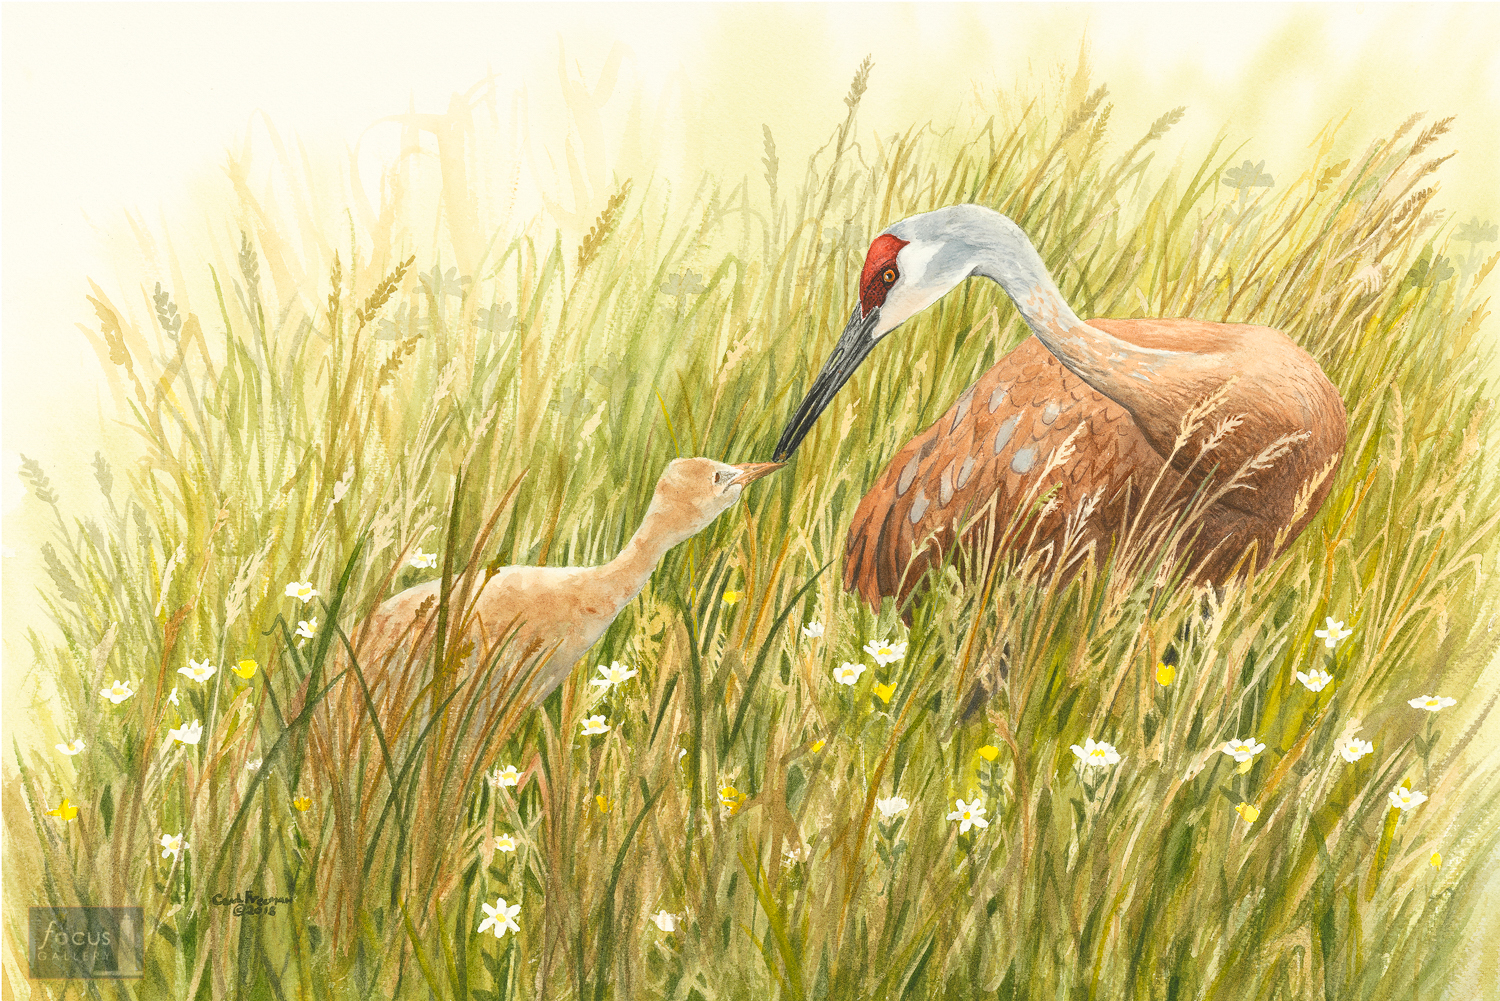 Original watercolor painting of a Sandhill Crane adult with a young chick.